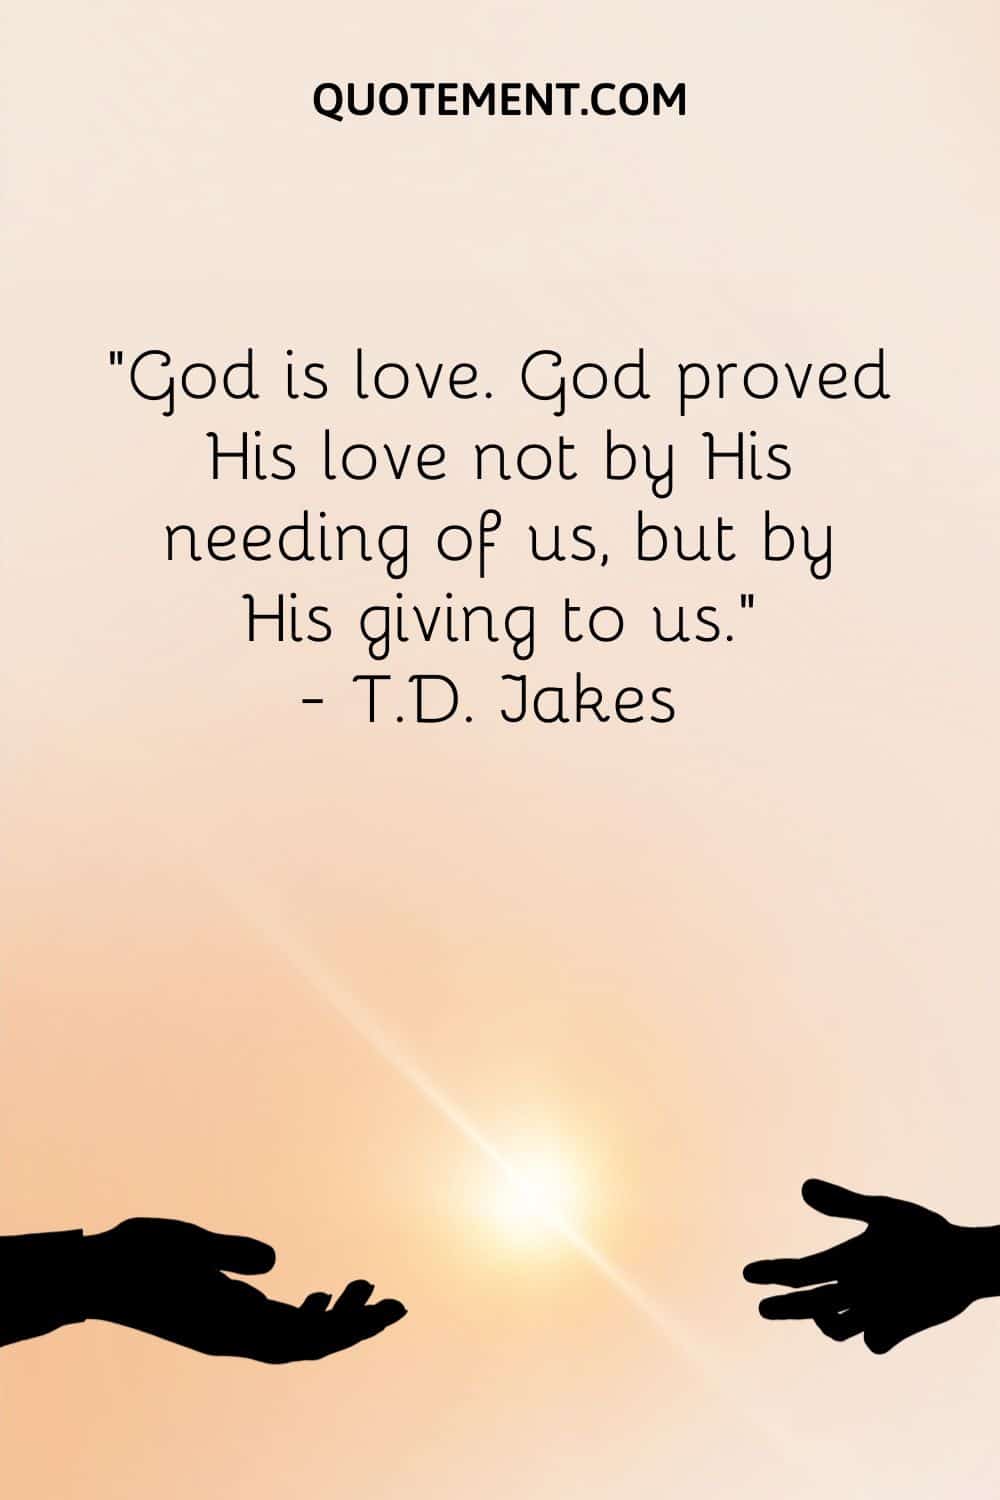 “God is love. God proved His love not by His needing of us, but by His giving to us.” ― T.D. Jakes